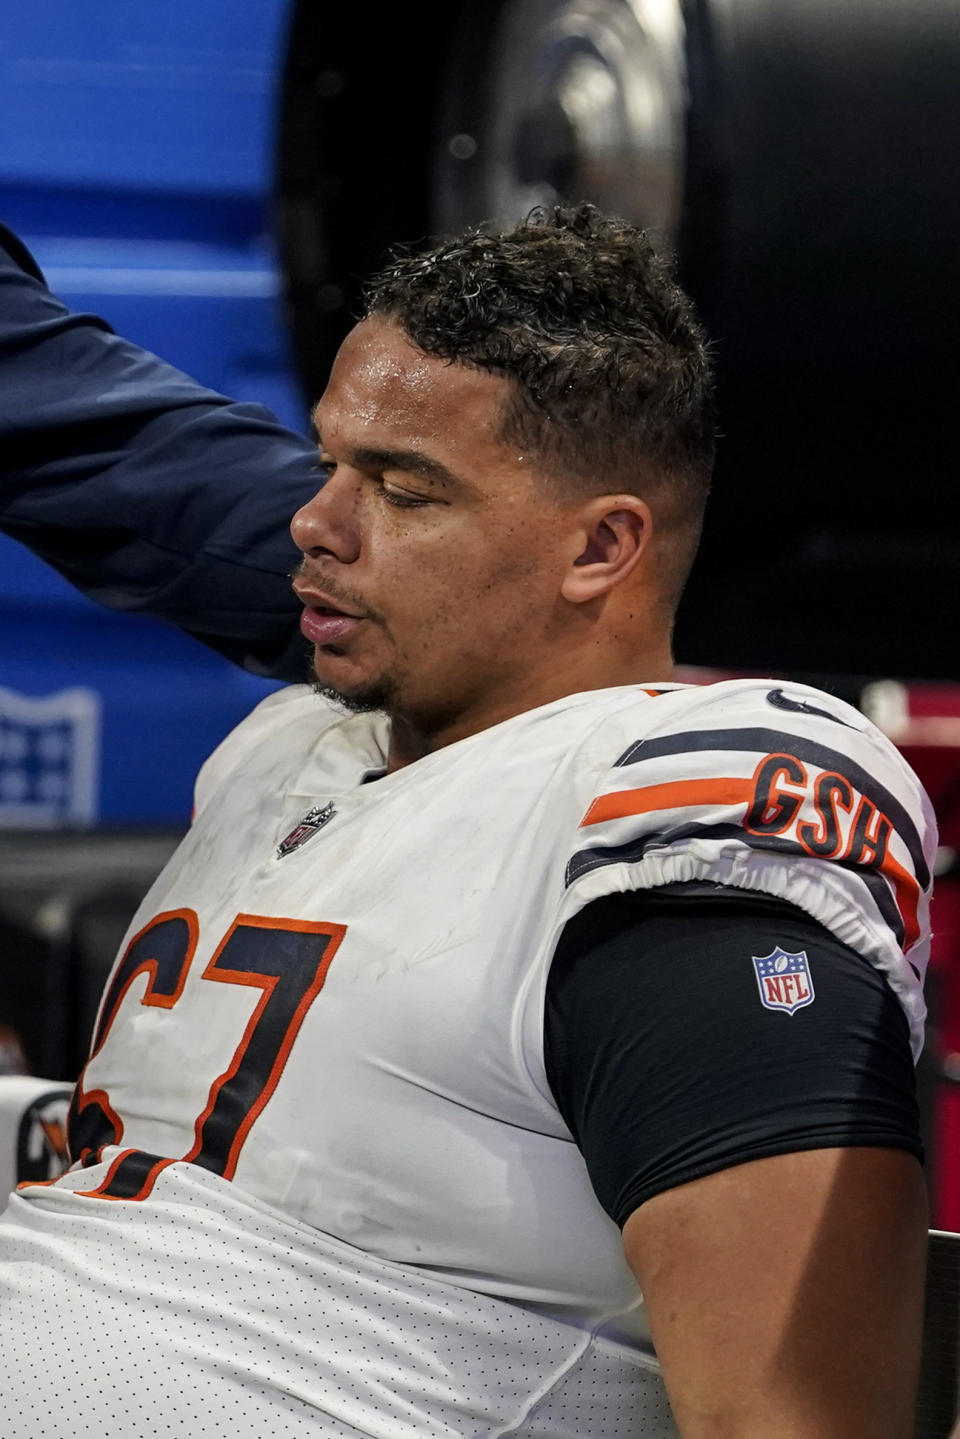 Chicago Bears center Sam Mustipher sits on the bench after an NFL football game between the Atlanta Falcons and the Chicago Bears, Sunday, Nov. 20, 2022, in Atlanta. The Atlanta Falcons won 27-24. (AP Photo/Brynn Anderson)